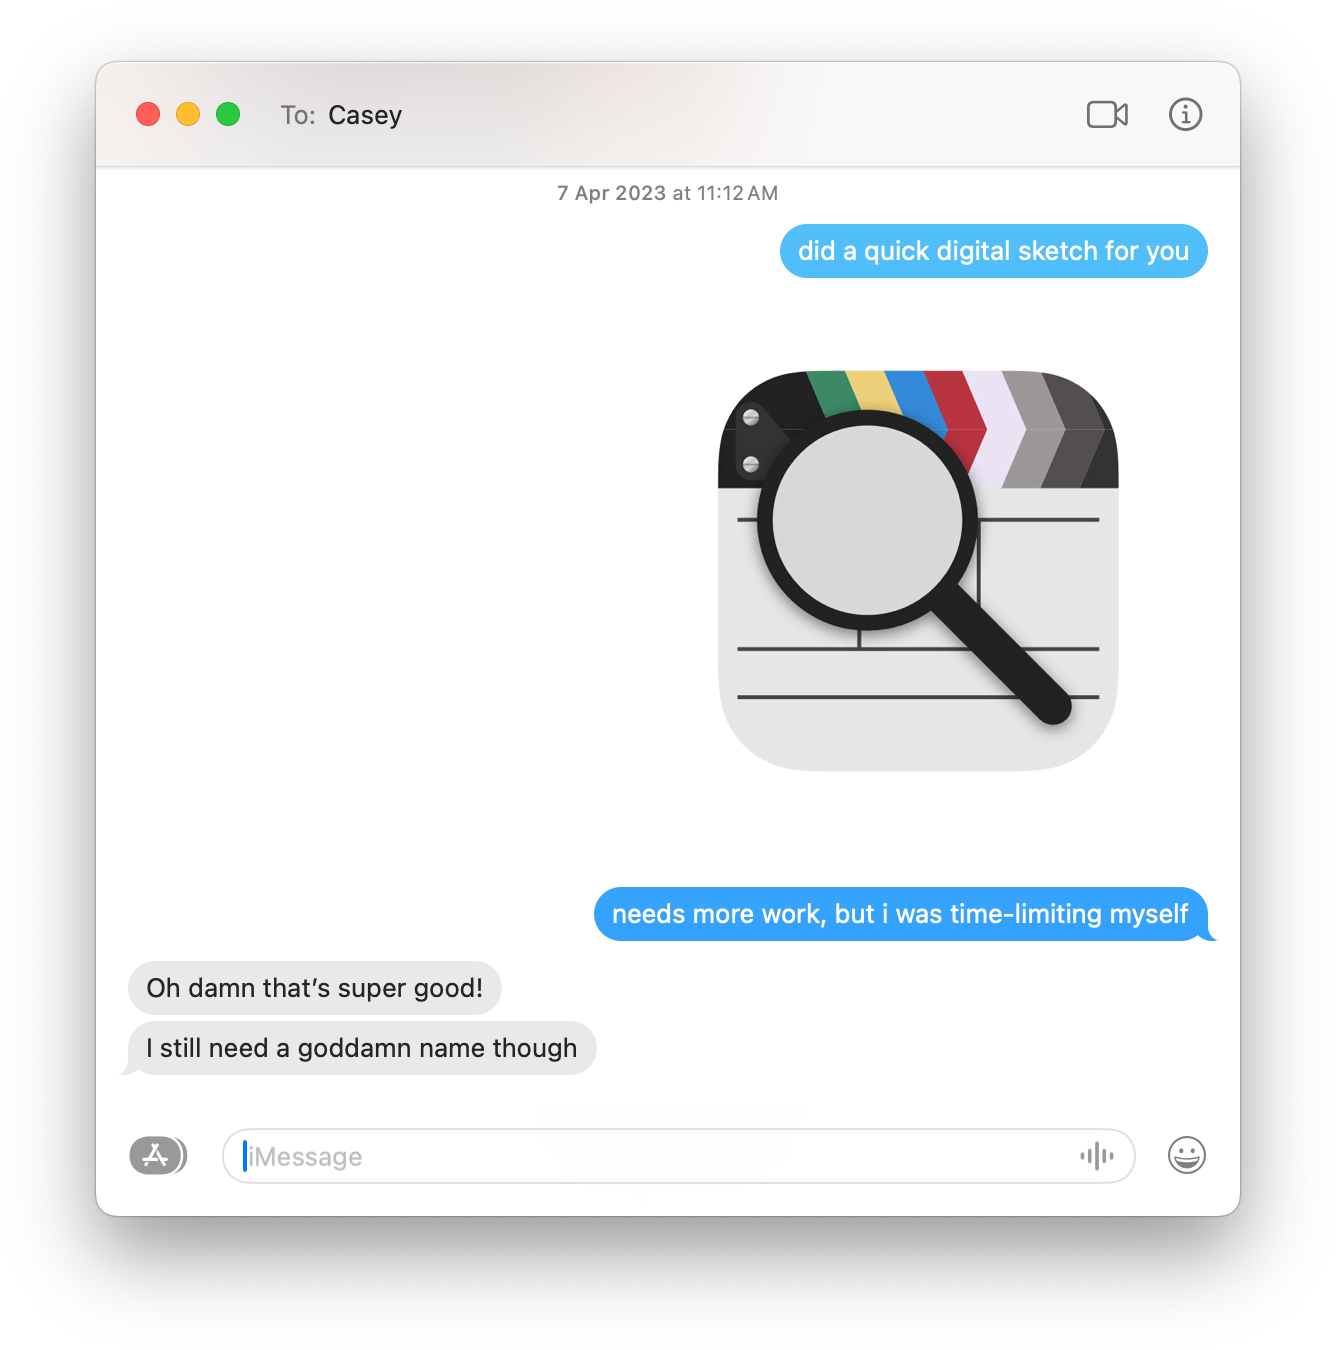 A screenshot of an iMessage conversation taken on macOS. On 7 April 2023, I told Casey "did a quick digital sketch", and then attached a screenshot of the icon. I then clarified "needs more work, but i was time-limiting myself." Casey's response is "Oh damn that's super good! I still need a goddamn name though."